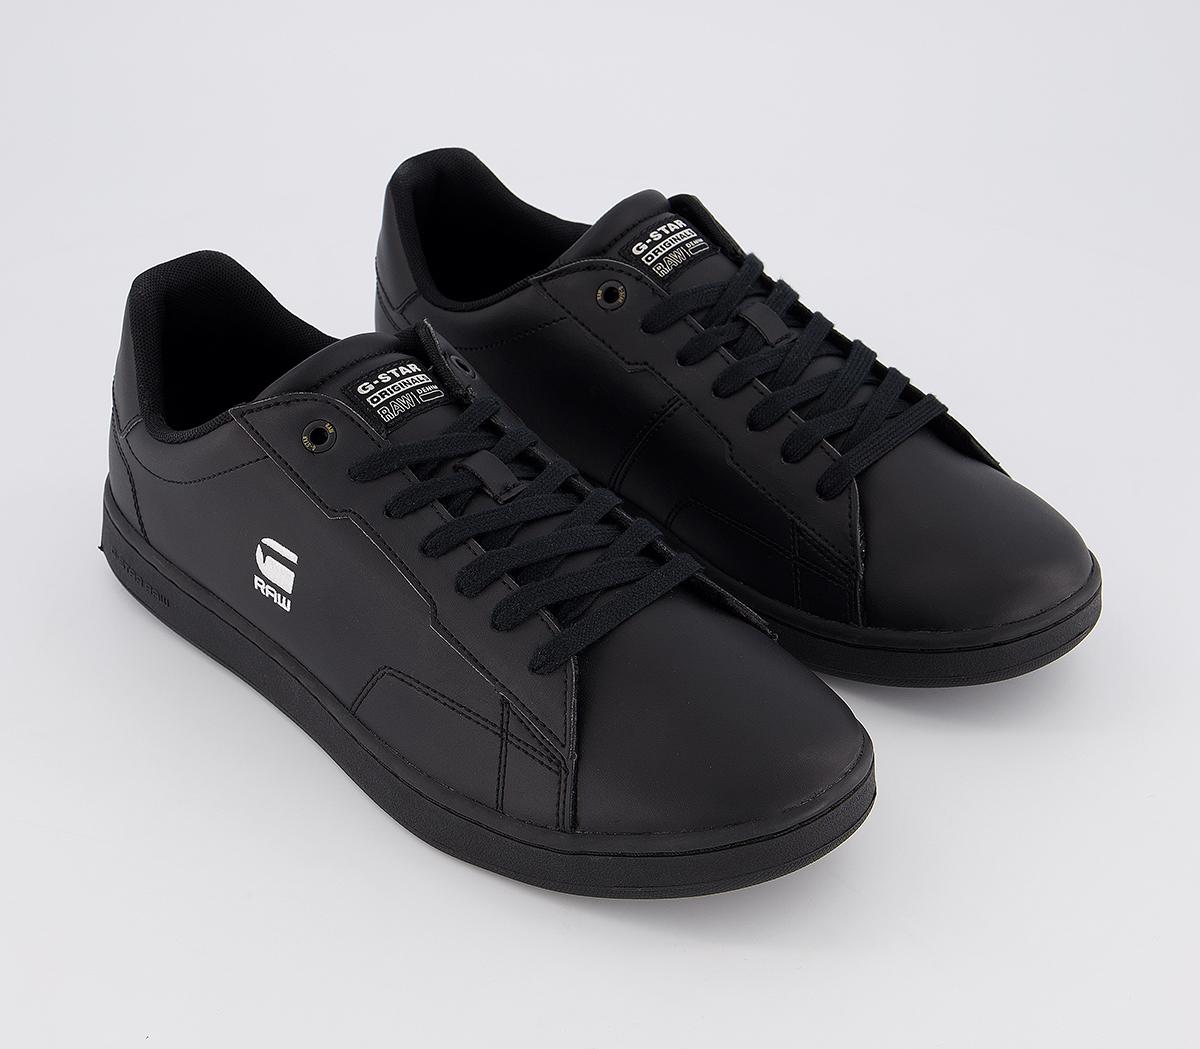 G-Star Cadet Sneakers Black - Men's Casual Shoes